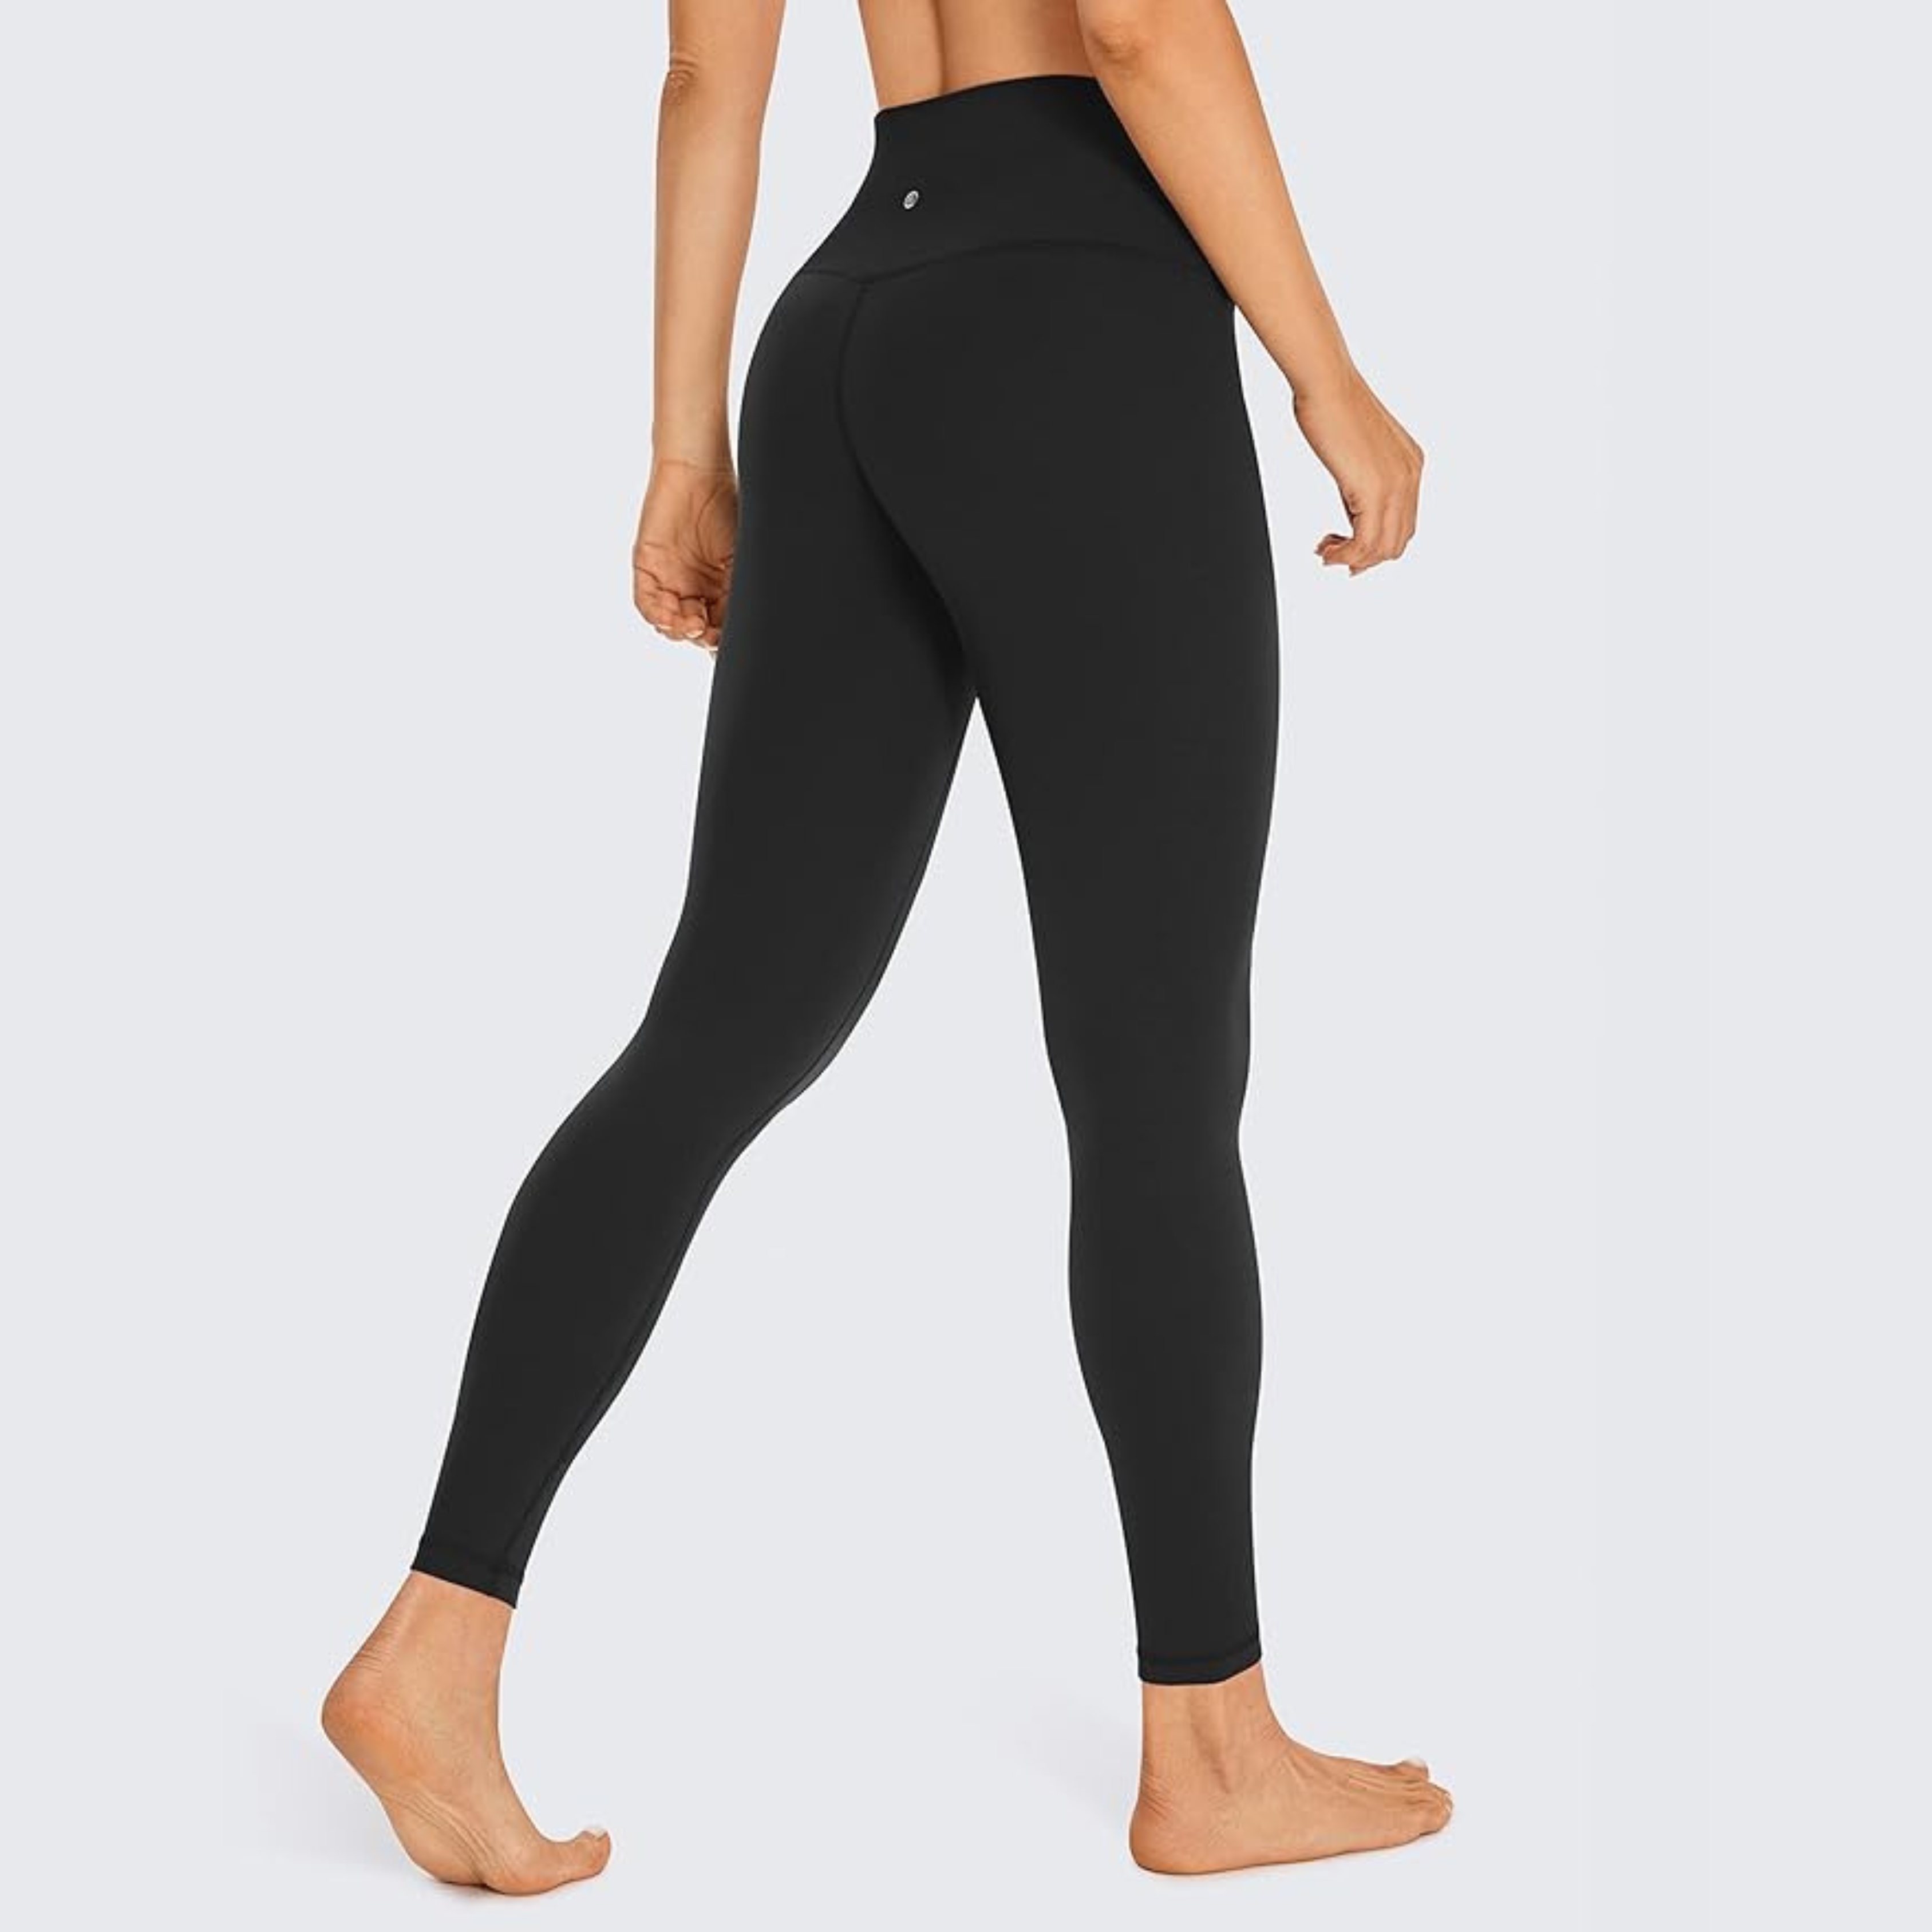 The best cheap leggings that are actually good are on sale for $21